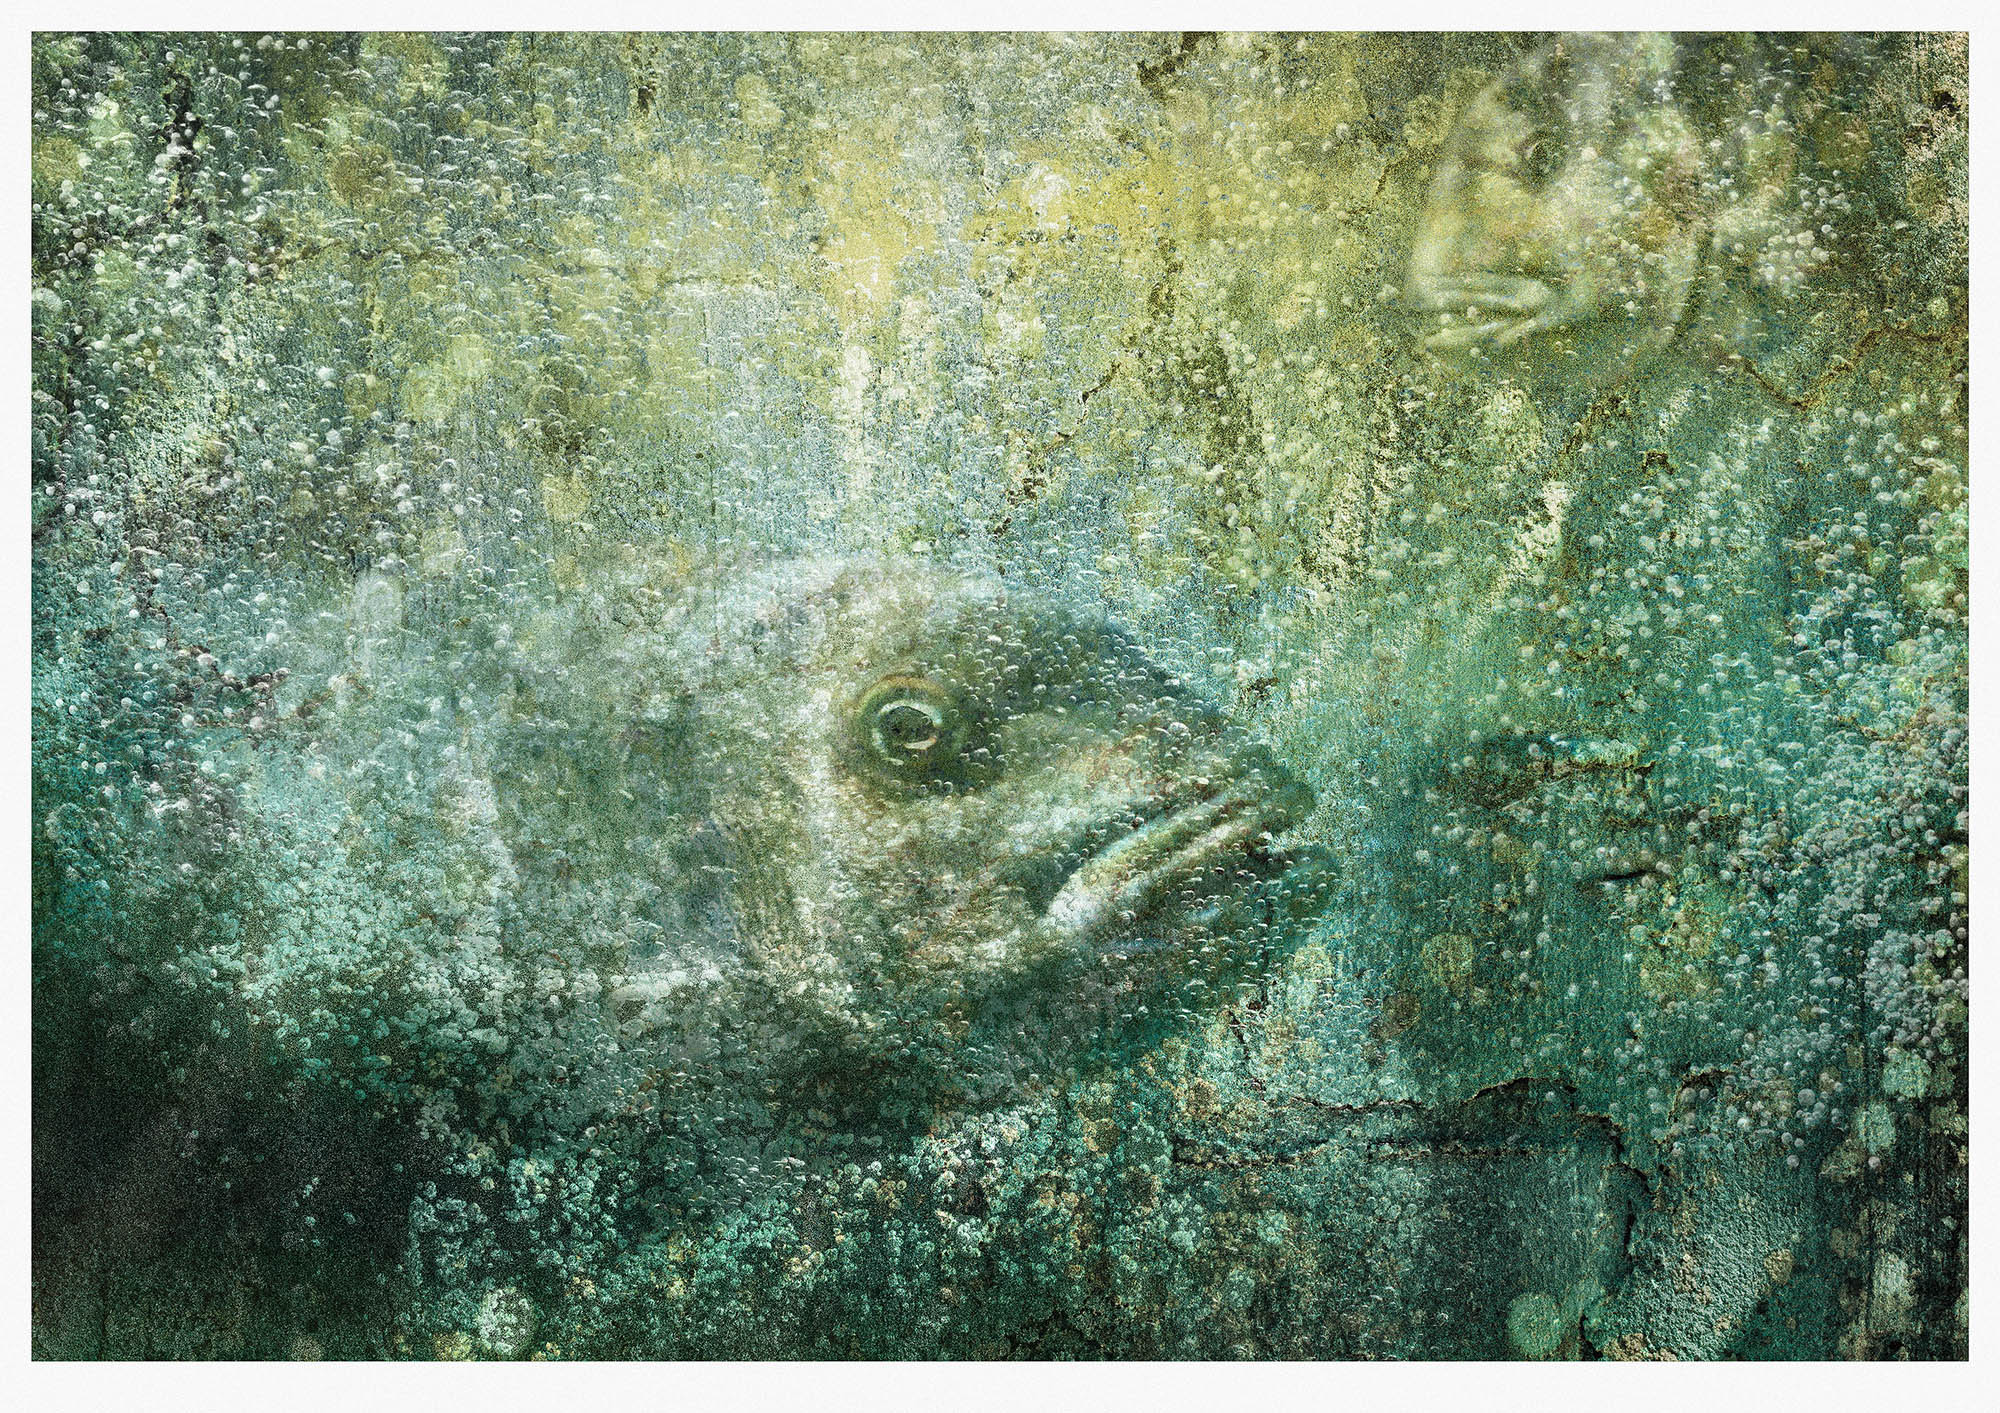 Monotoned underwater scene with two fish and many bubbles constructed from lichen stained wall water and a fish 